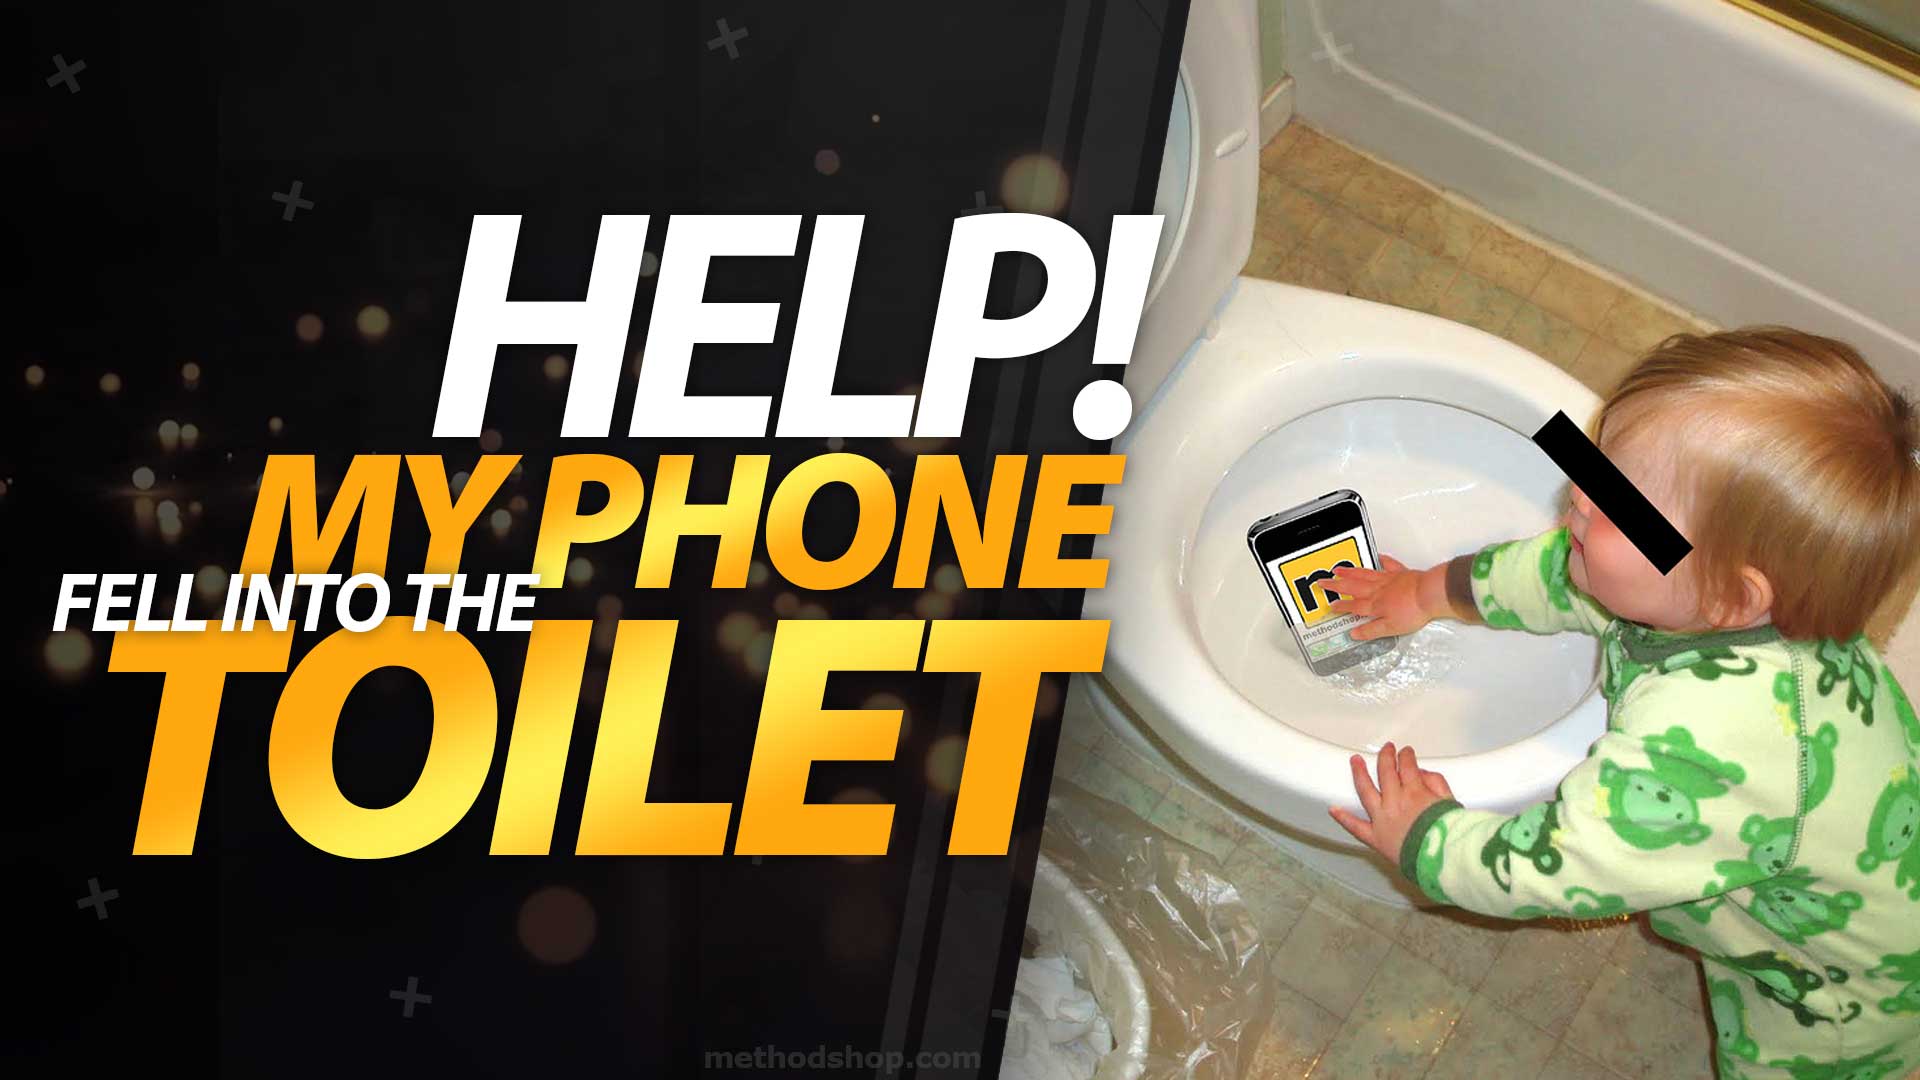 Dropped iPhone In Toilet? No Problem. Here's How To Save It!